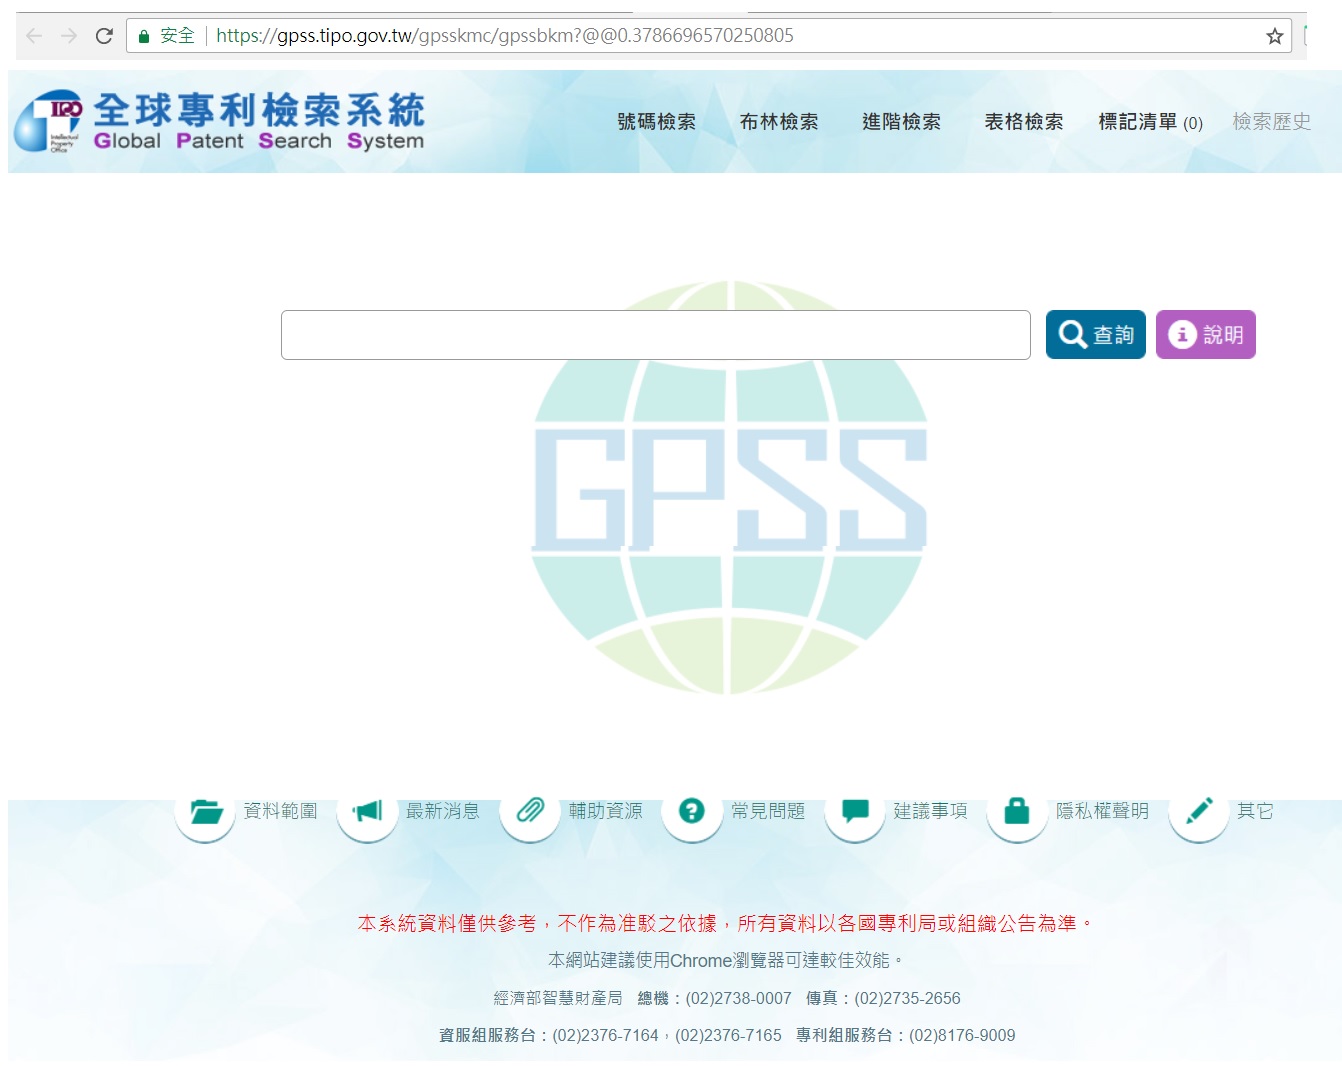 Taiwan TIPO “Industrial Patent Knowledge Platform System” provides open data of worldwide top 5 patent offices and Taiwan’s latest invention patent publication